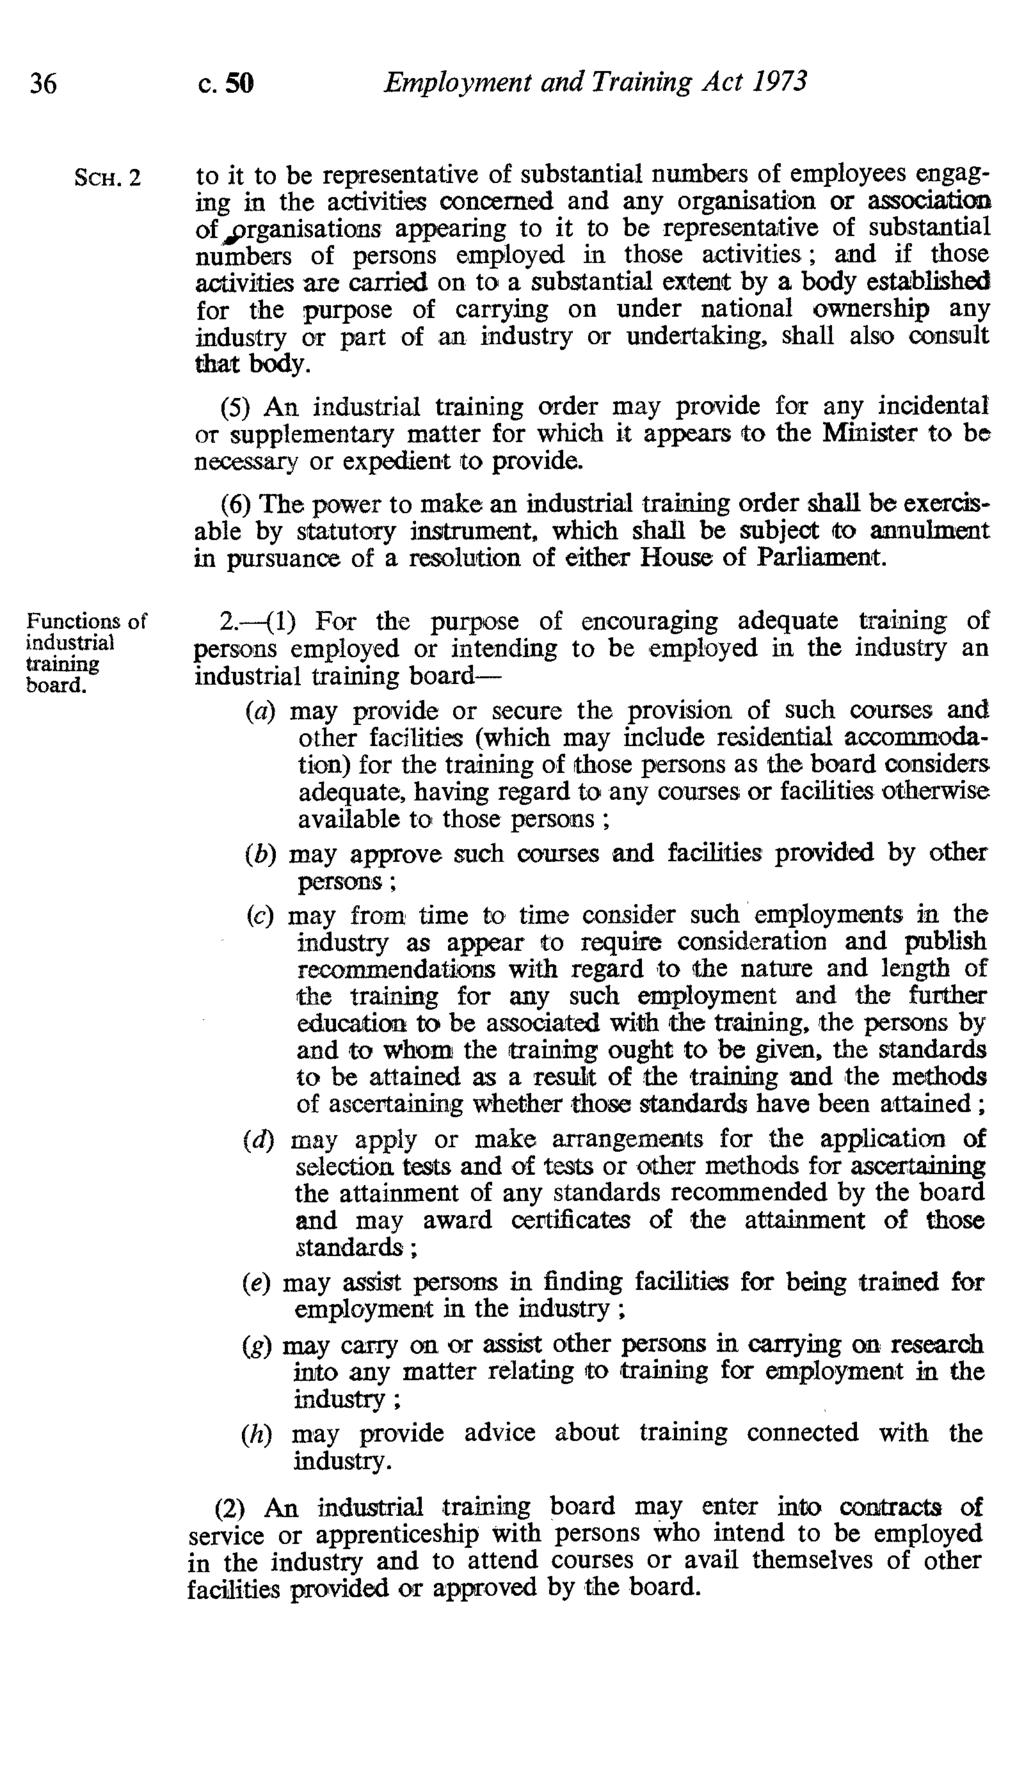 36 c. 50 Employment and Training Act 1973 ScH. 2 Functions of industrial training board.